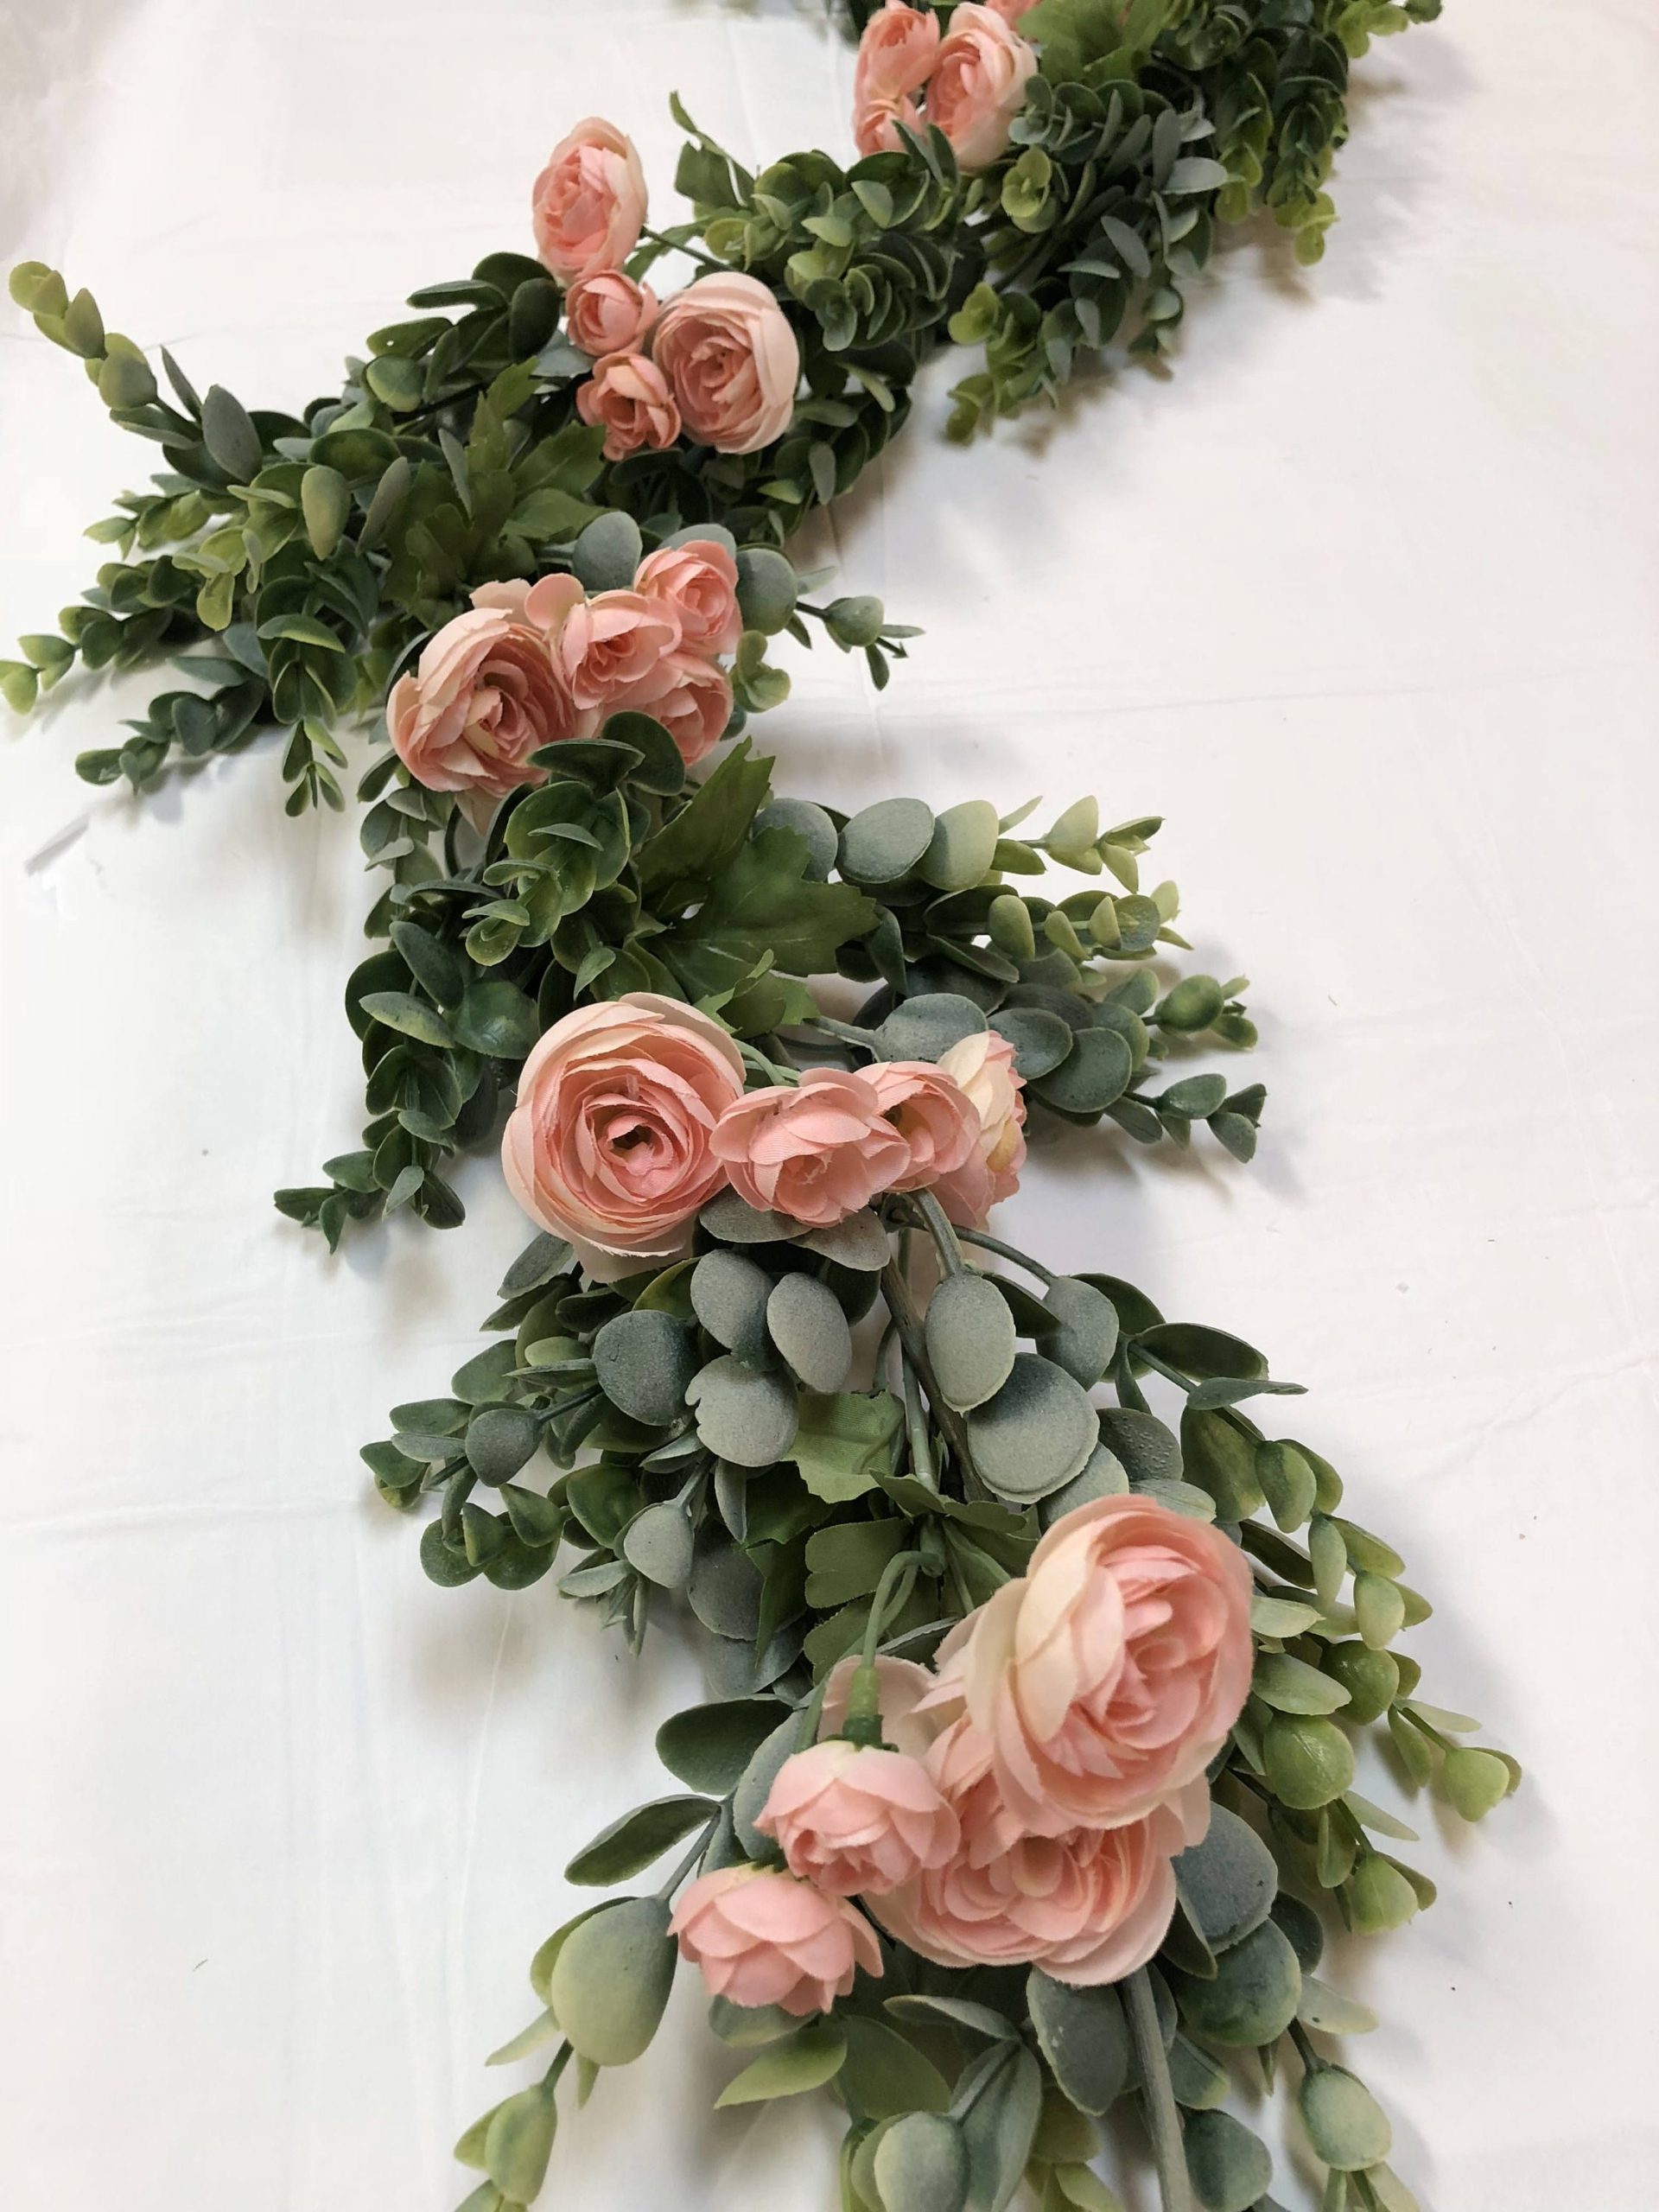 Wedding Garland Decoration: Use as Table Runners, Wedding Arch, Etc ...